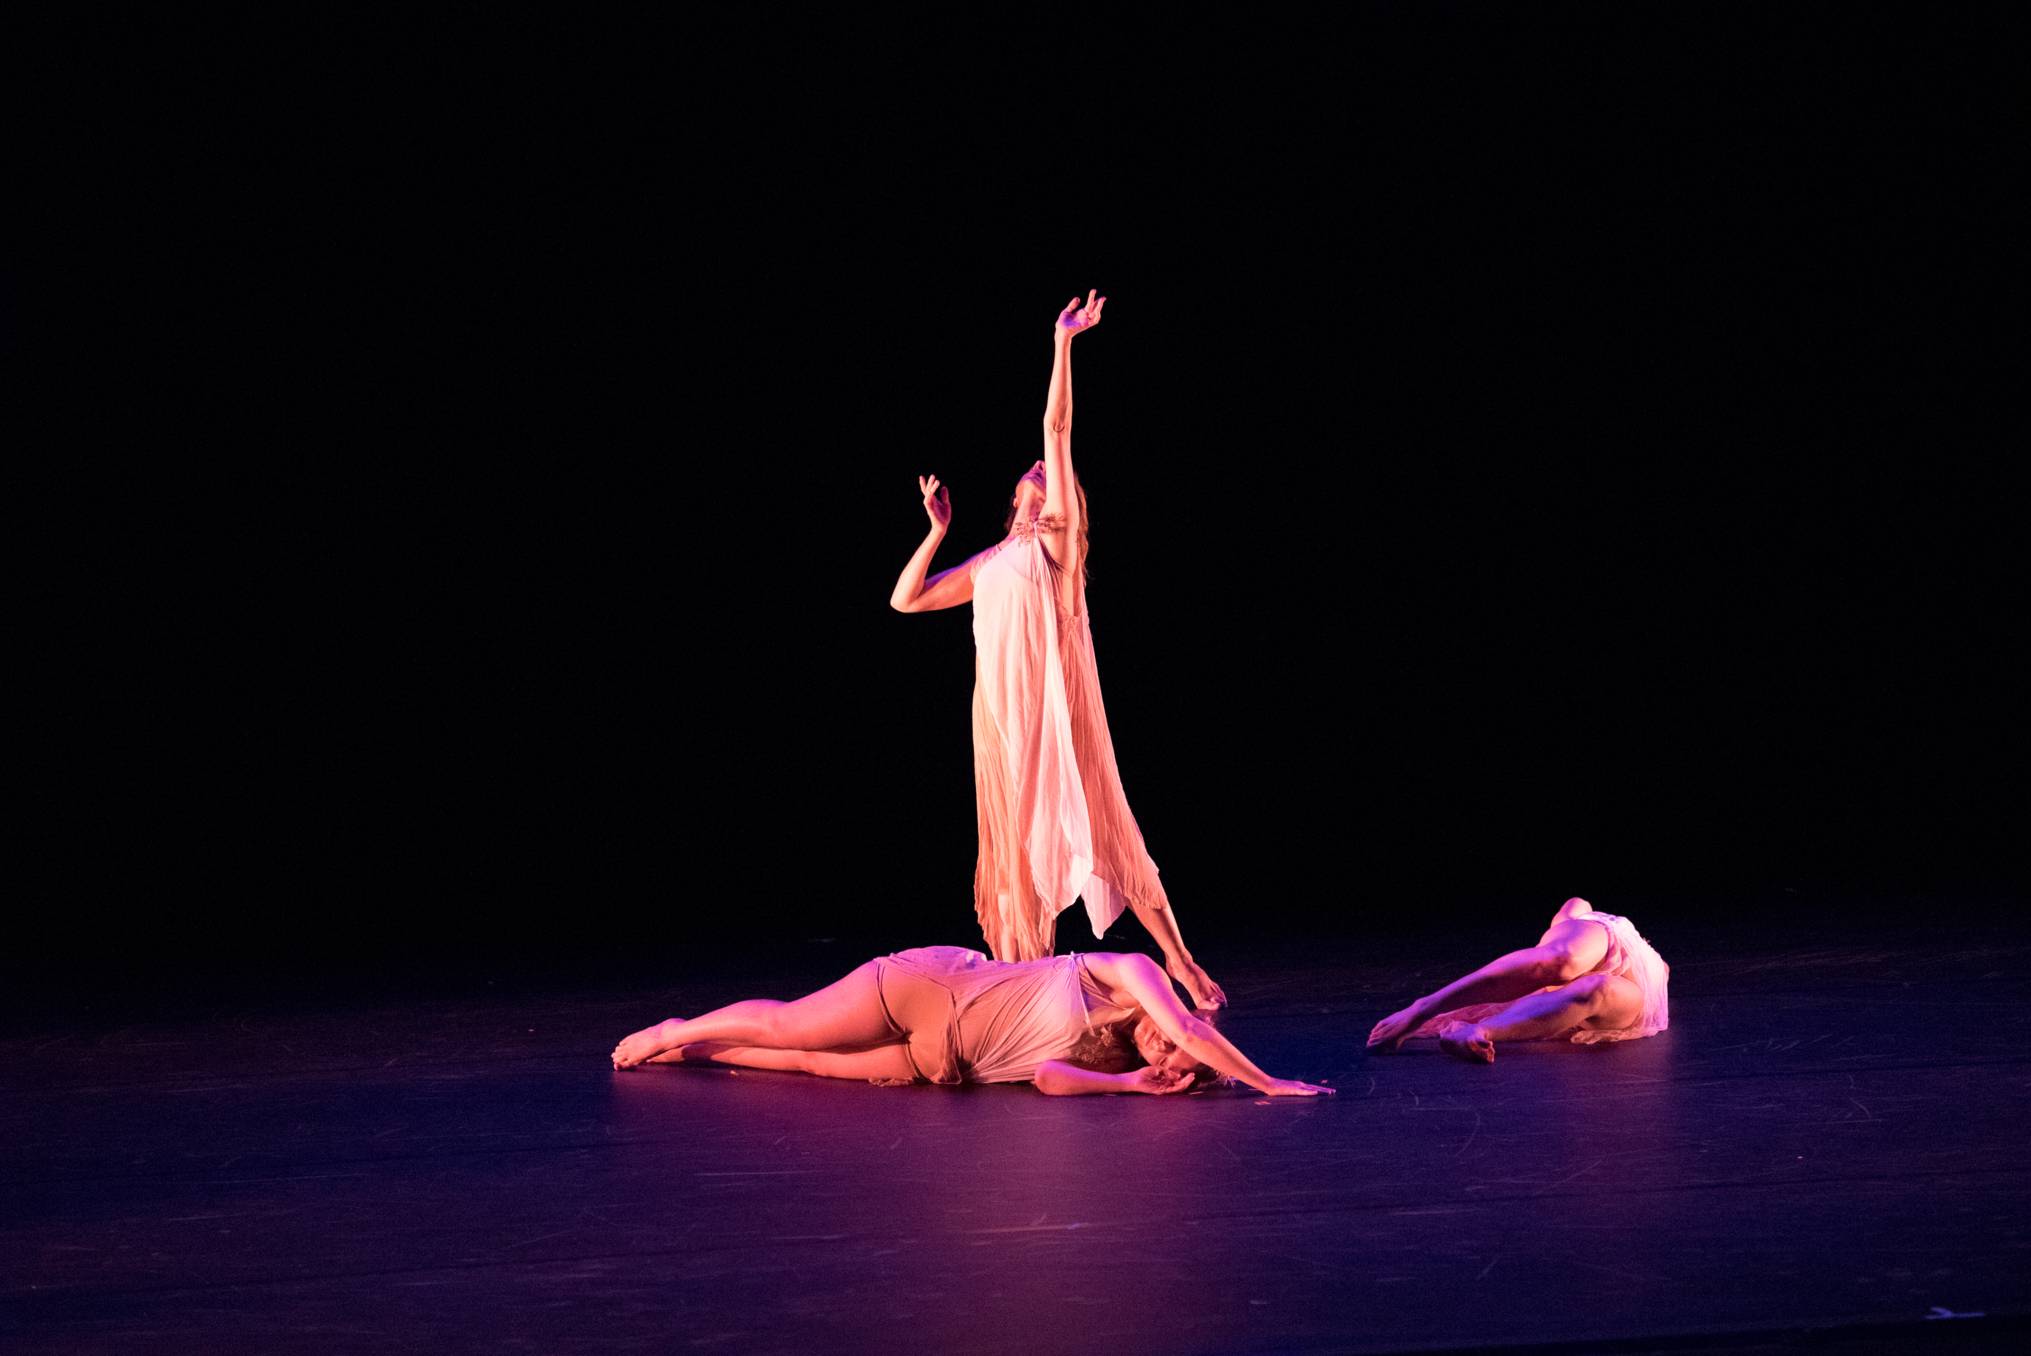 Dancers on stage at Texas State University